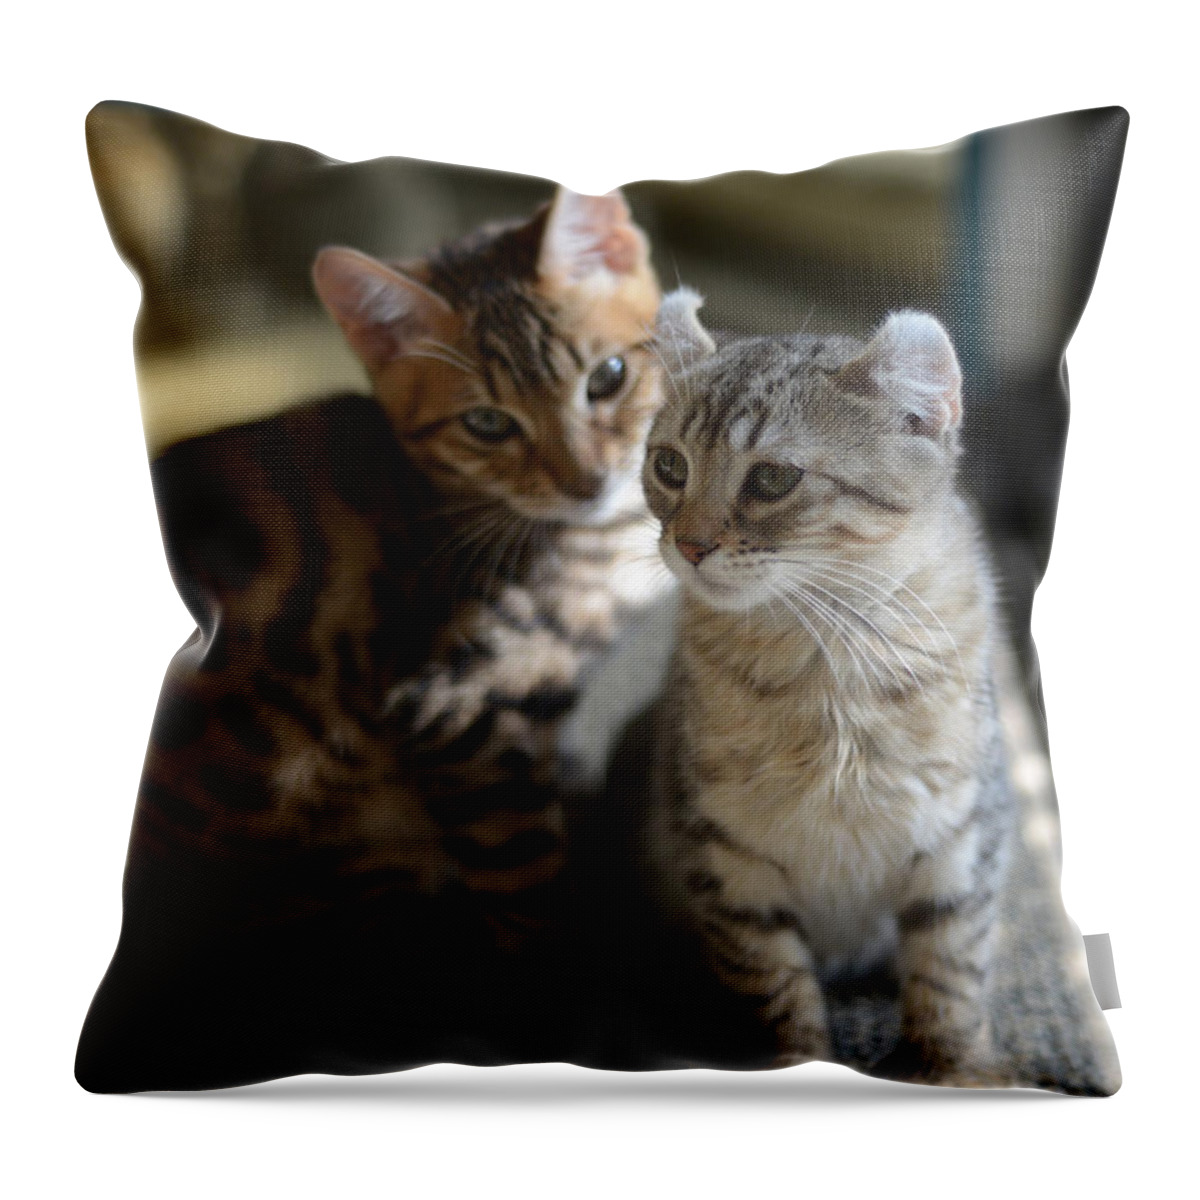 Kittens Throw Pillow featuring the photograph Best Buds by Craig Incardone